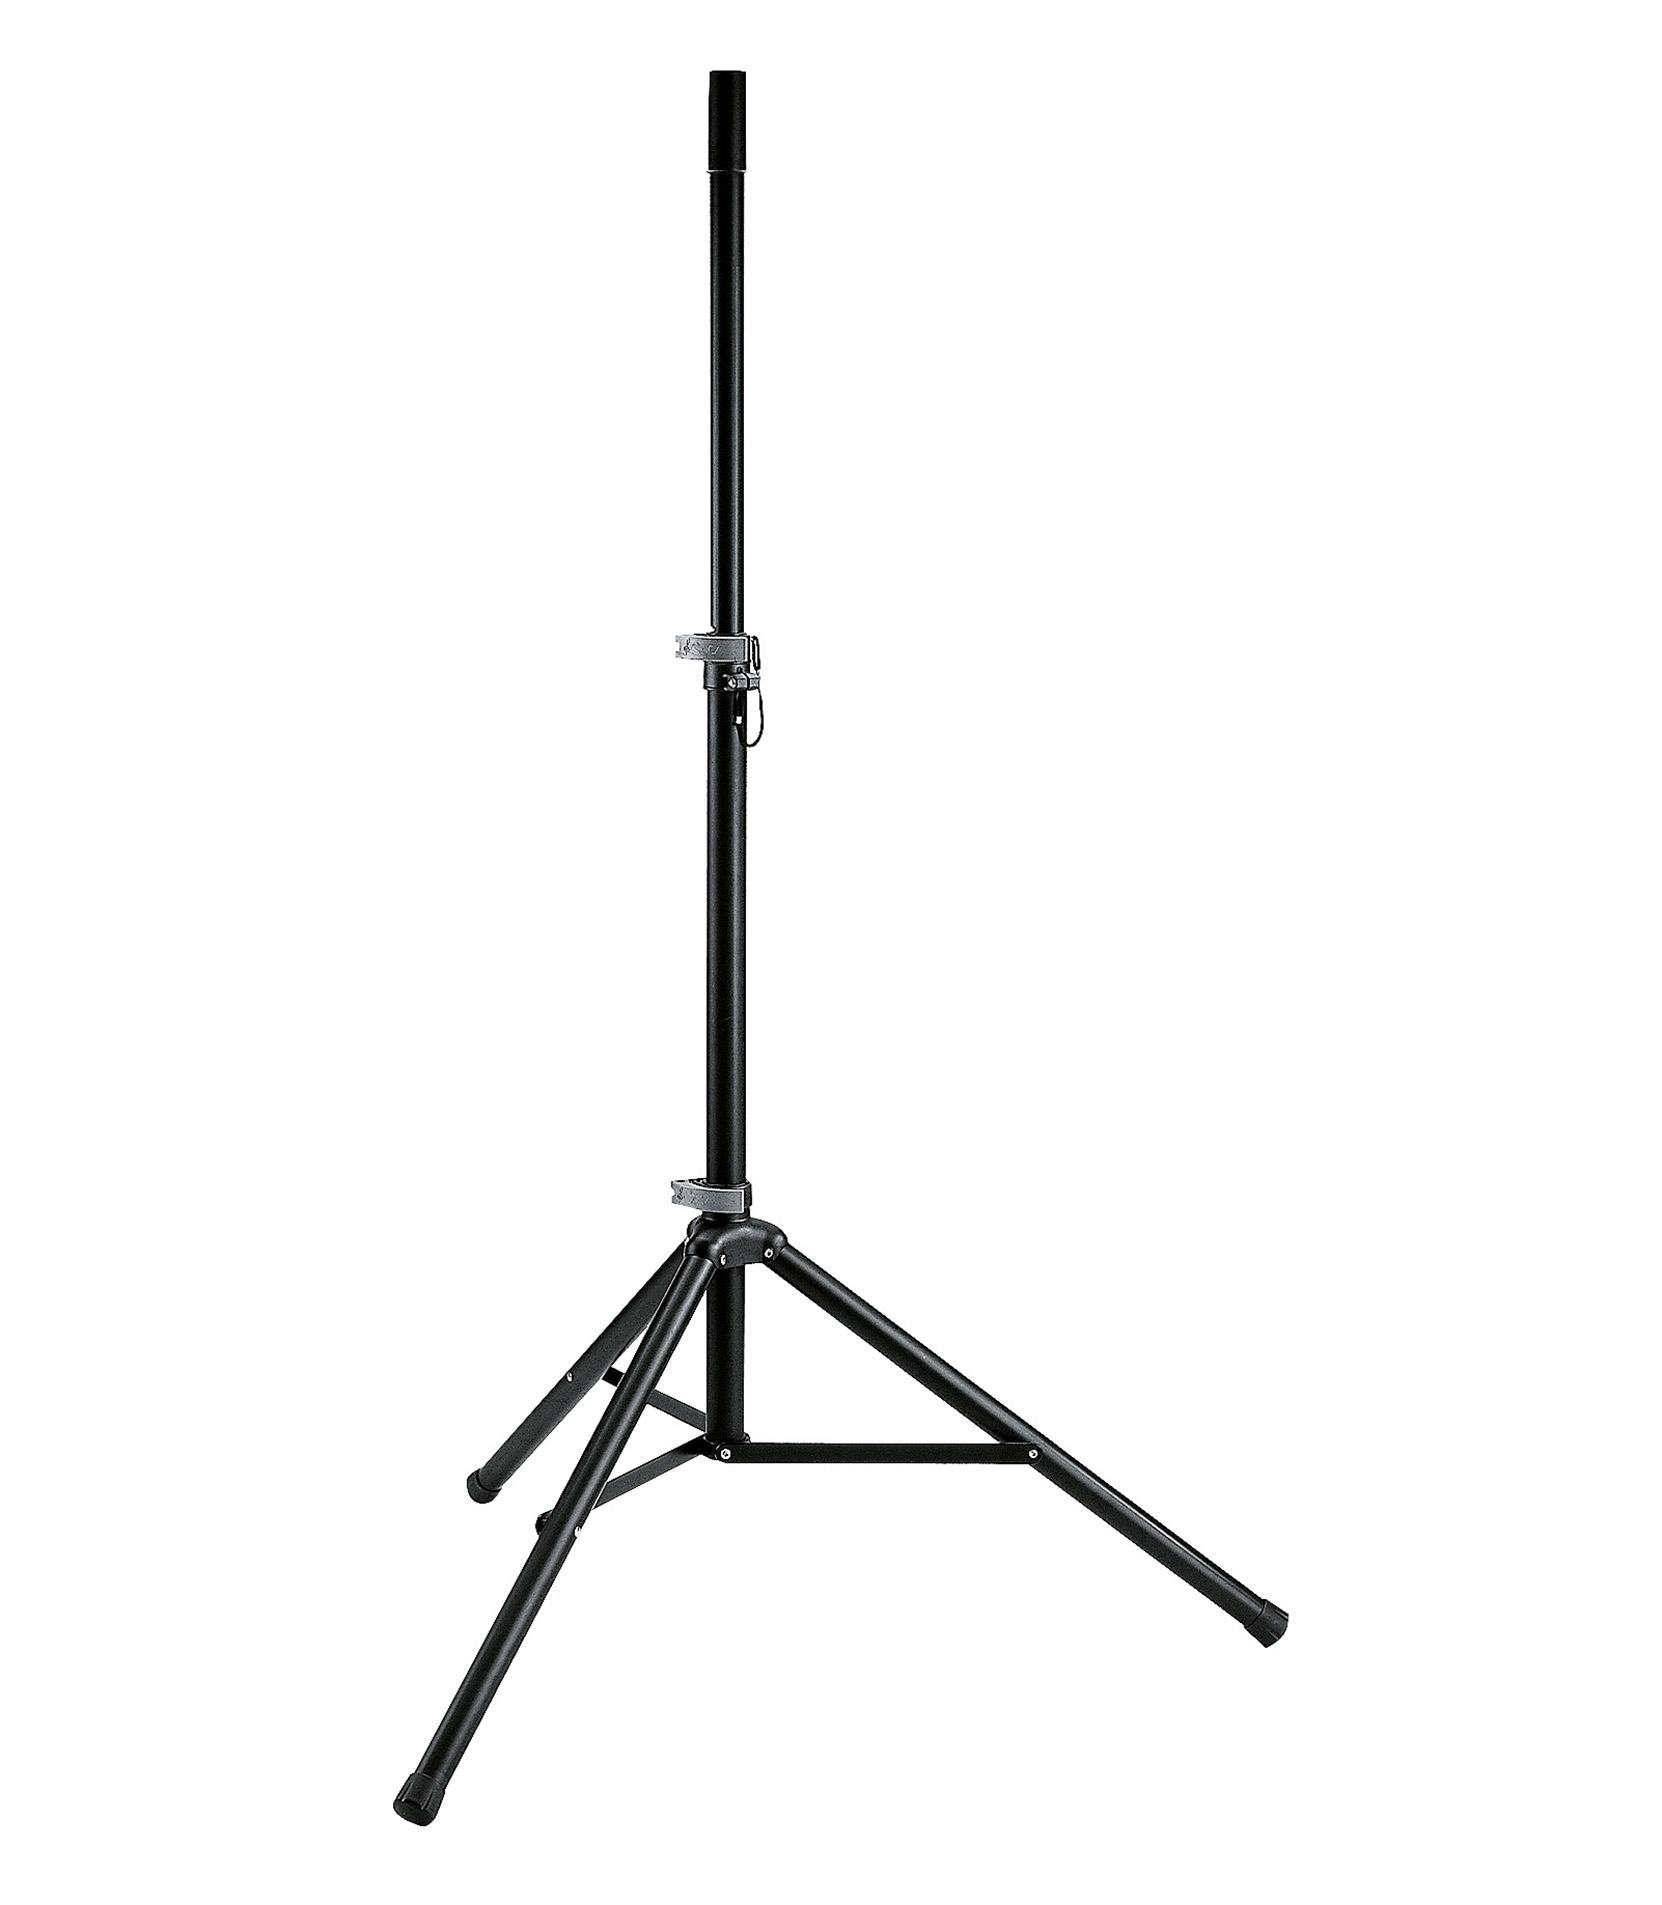 K&M - Speaker Stand Made of High Quality Aluminum